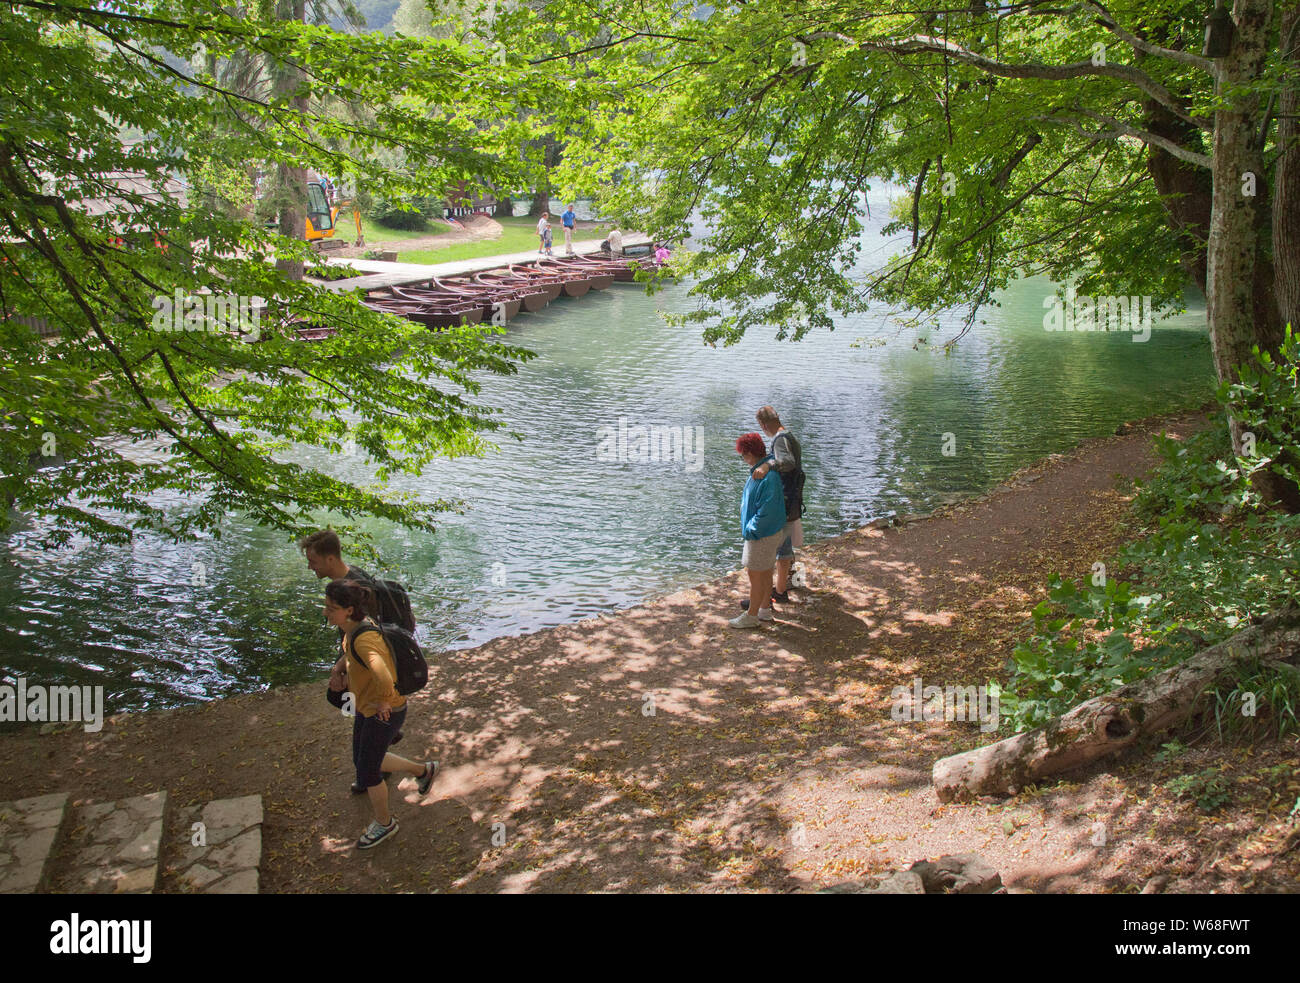 People enjoying Plitvice Lakes National Park, Croatia. A UNESCO World Heritage site, this natural wonder contains 16 lakes interconnected by rivers an Stock Photo